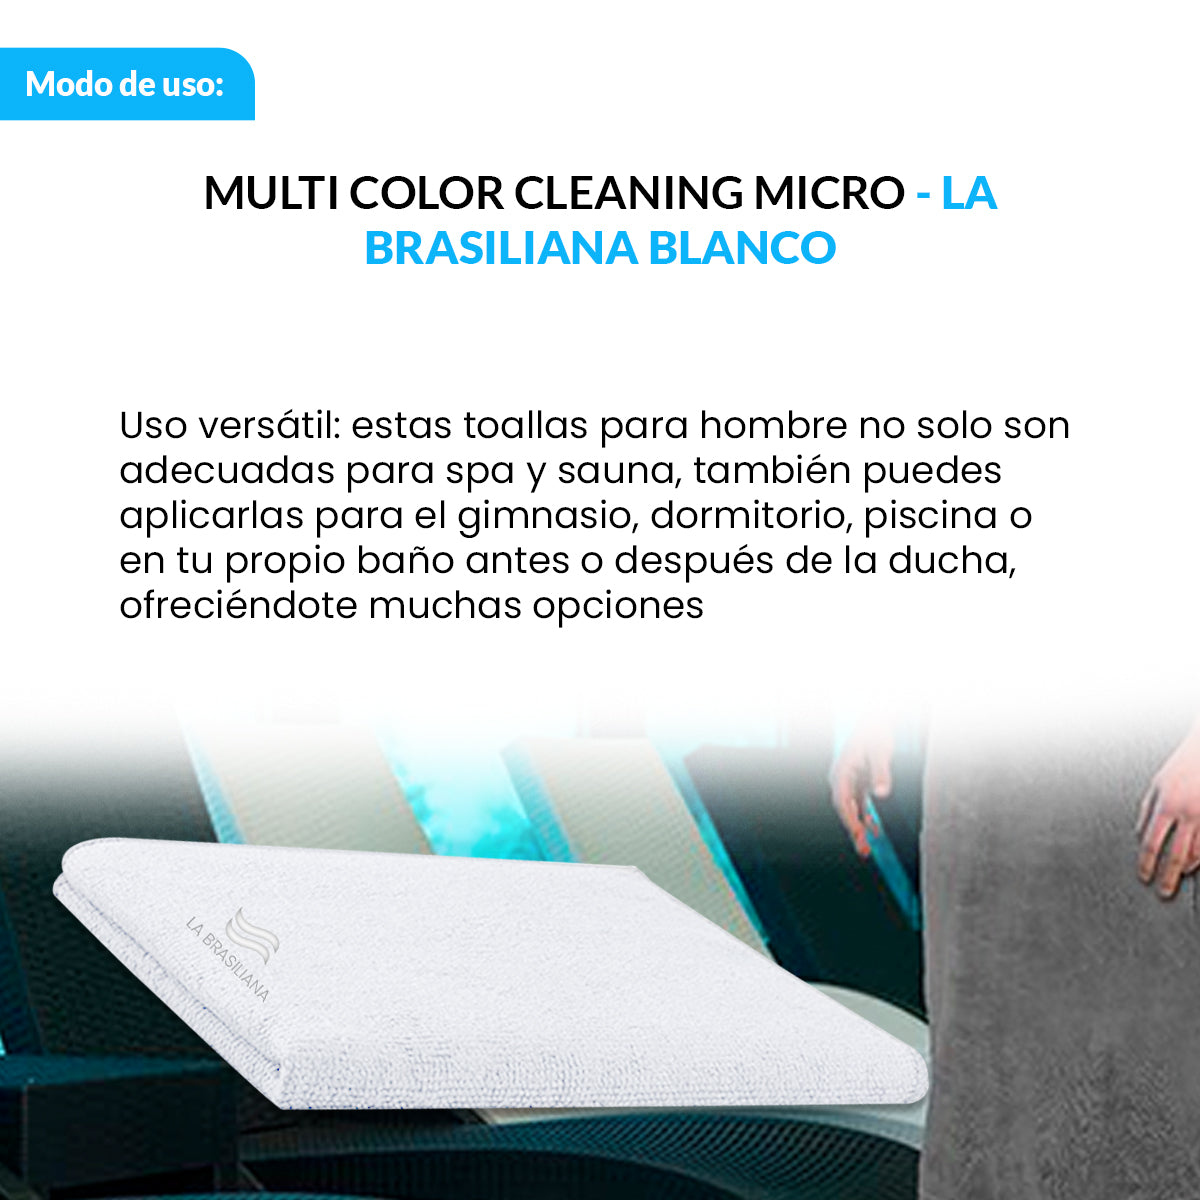 Multi Color Cleaning Micro - Blanco